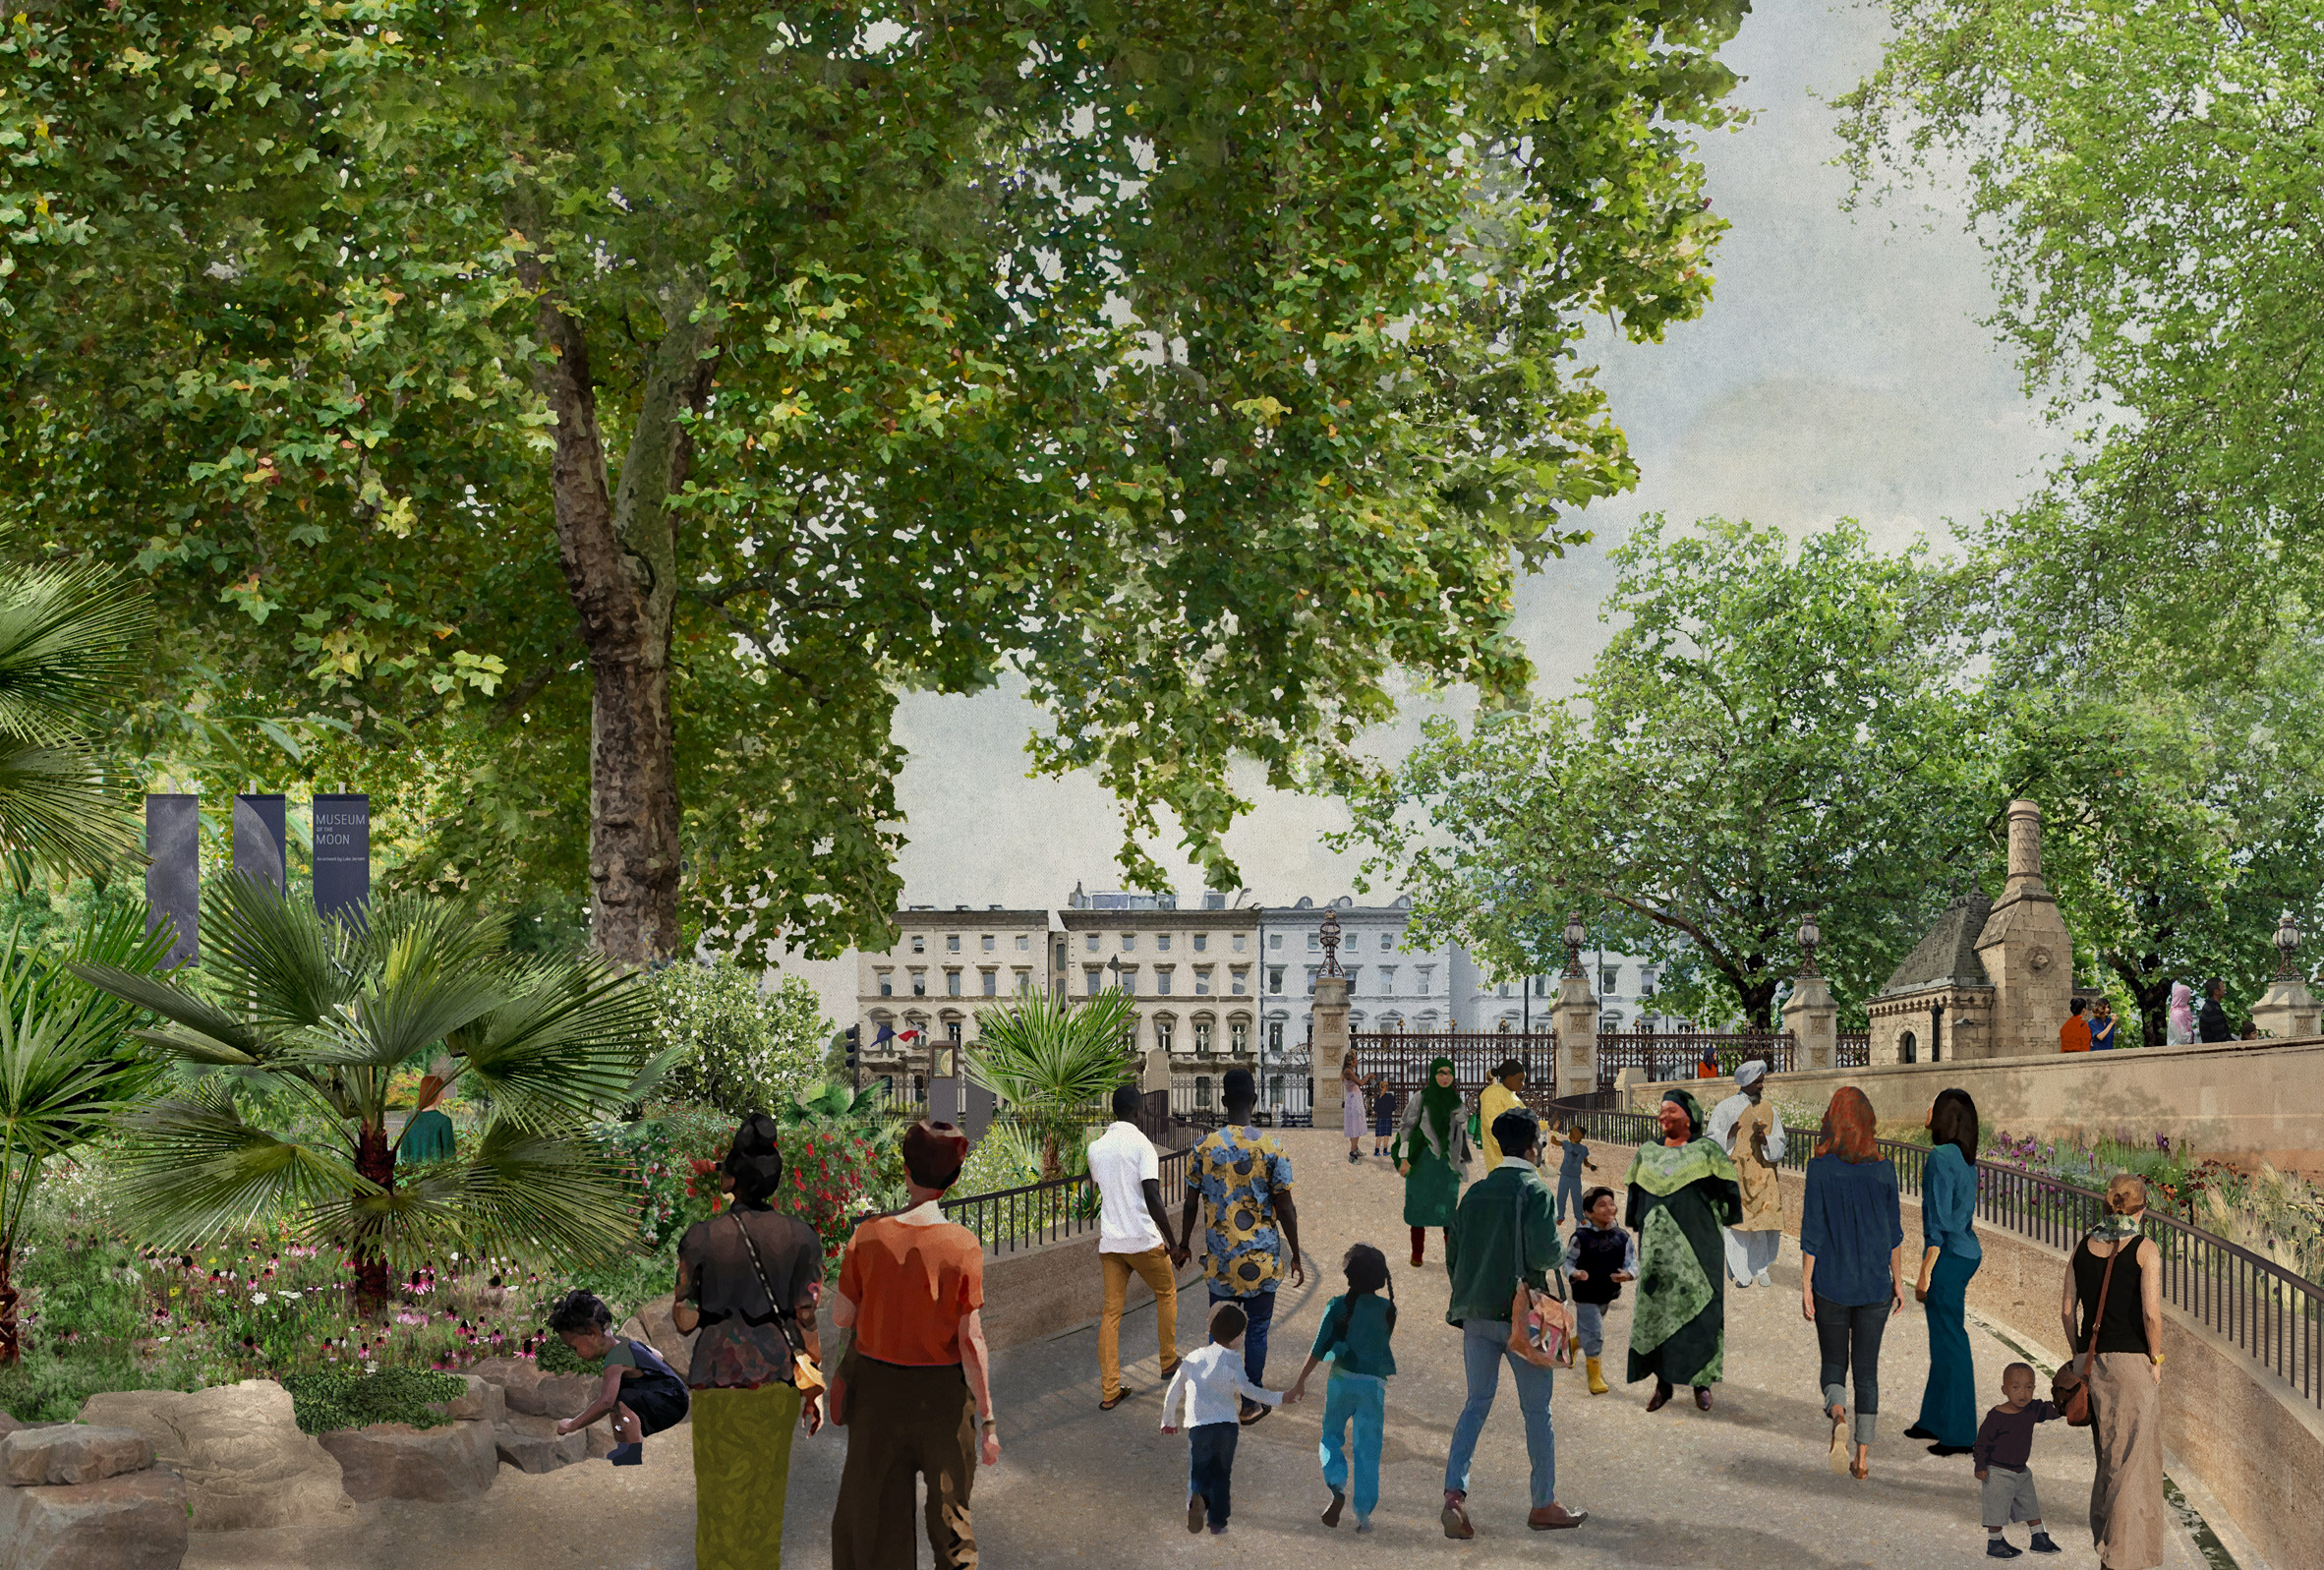 The proposed Garden Building of the Urban Nature Project by Feilden Fowles